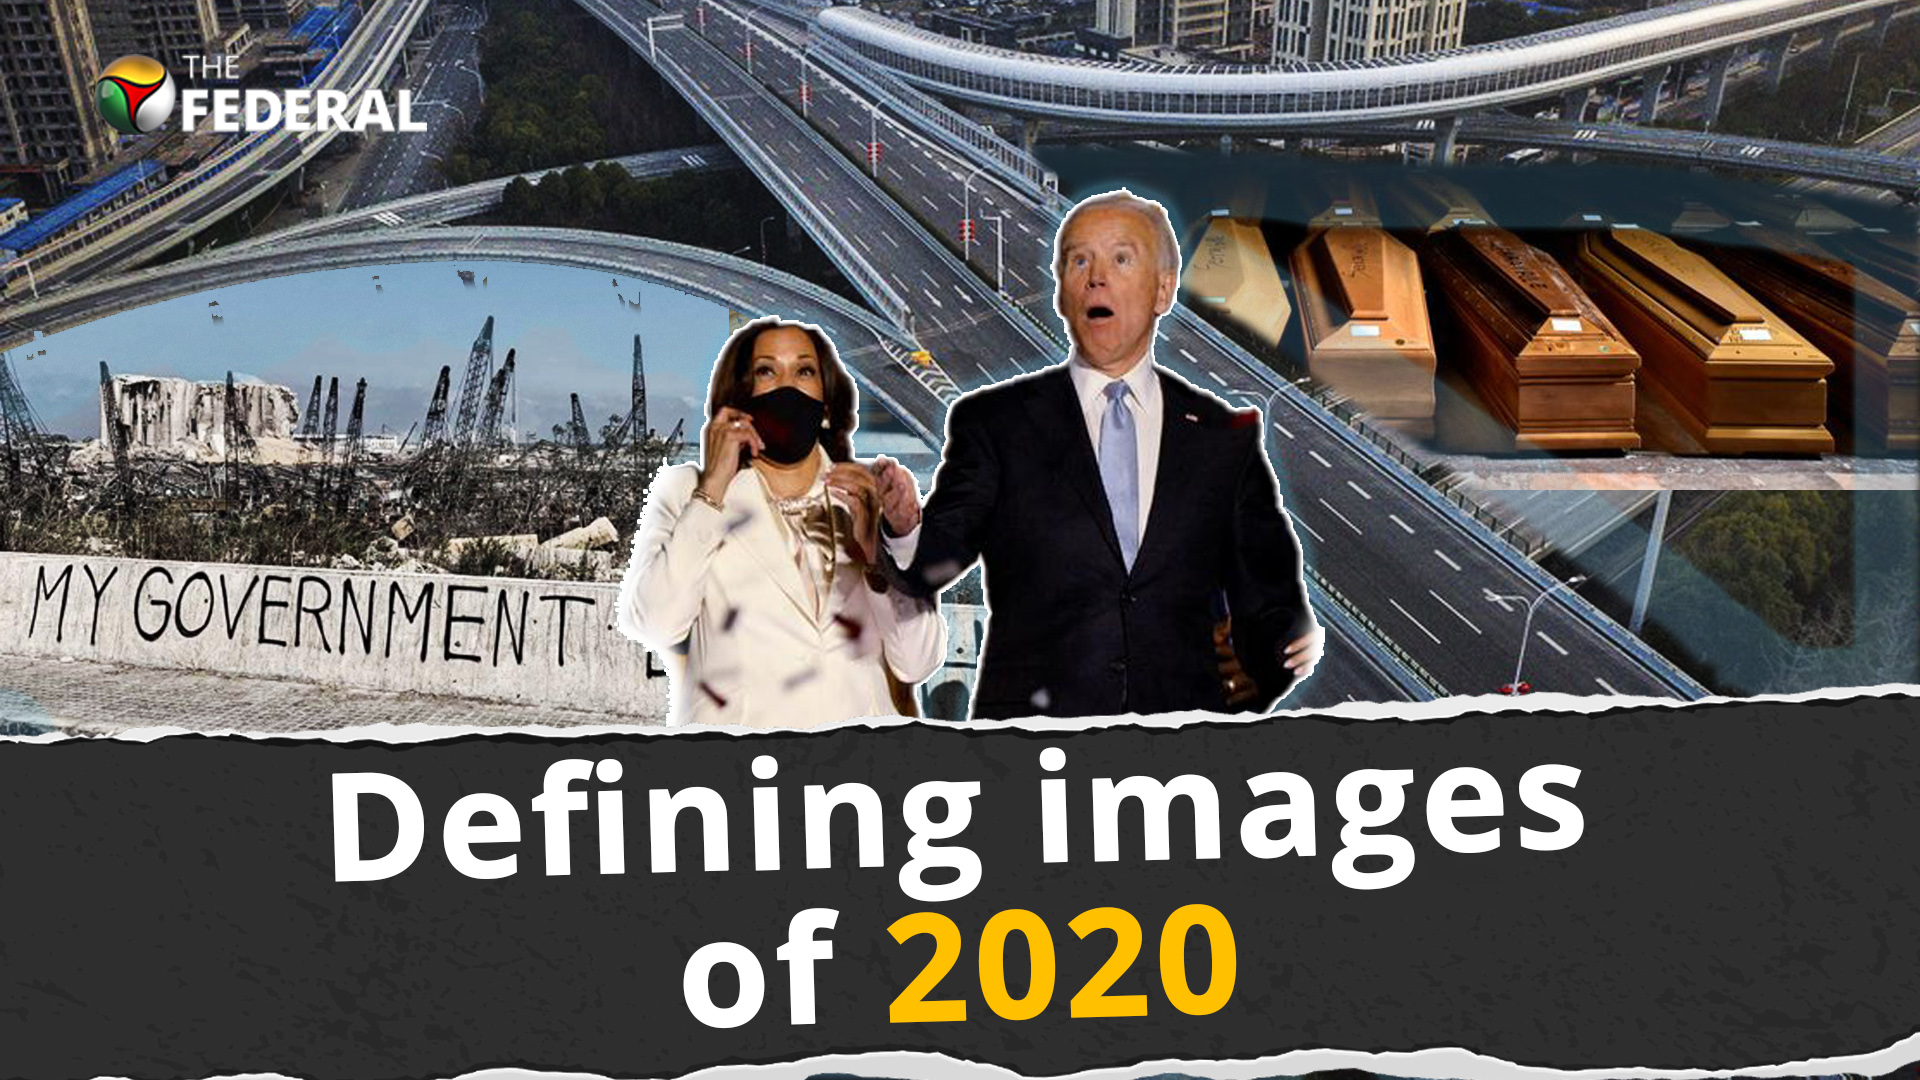 Watch: The events — and images — that defined the year 2020